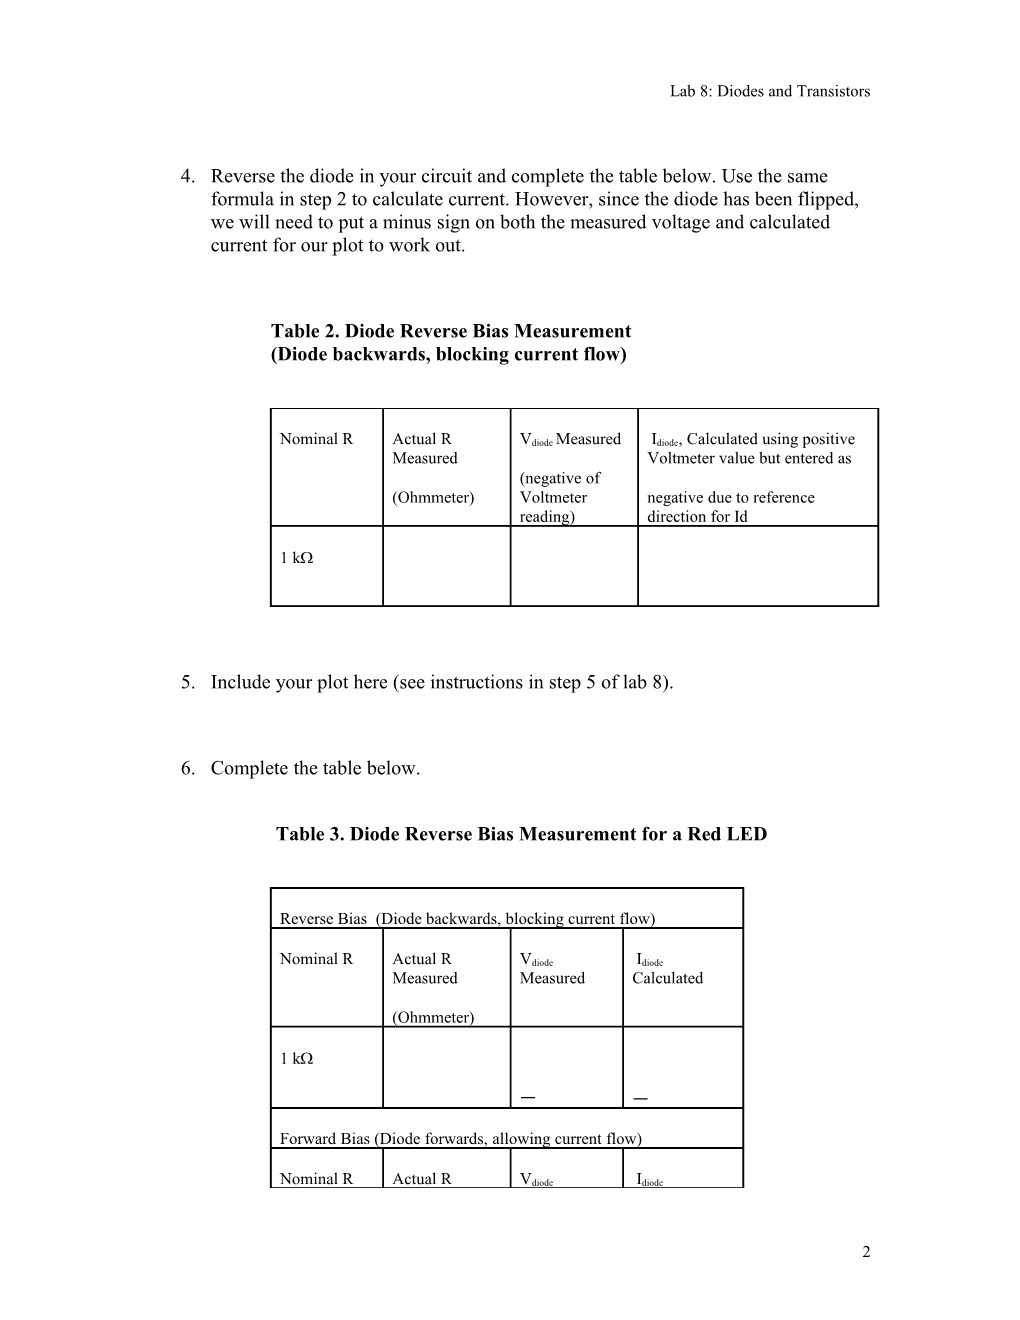 Datasheet for Lab 8: Diodes and Transistors